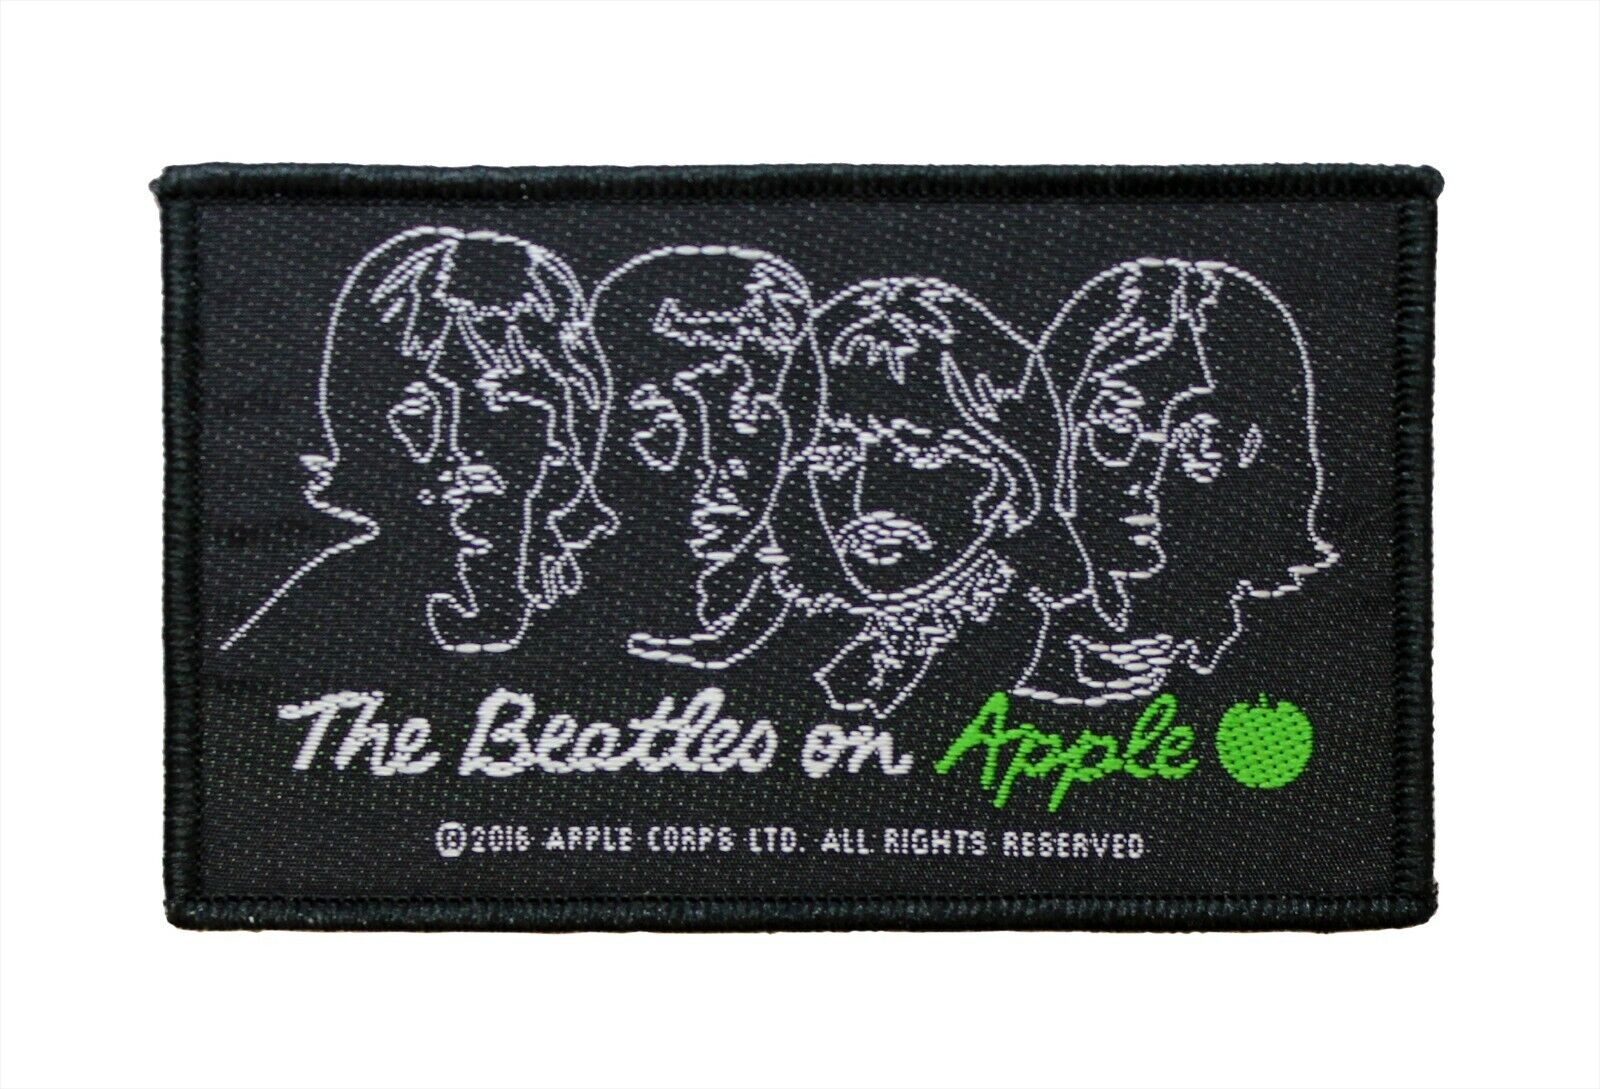 The Beatles On Apple Woven Sew On Battle Jacket Patch - Licensed 077-h